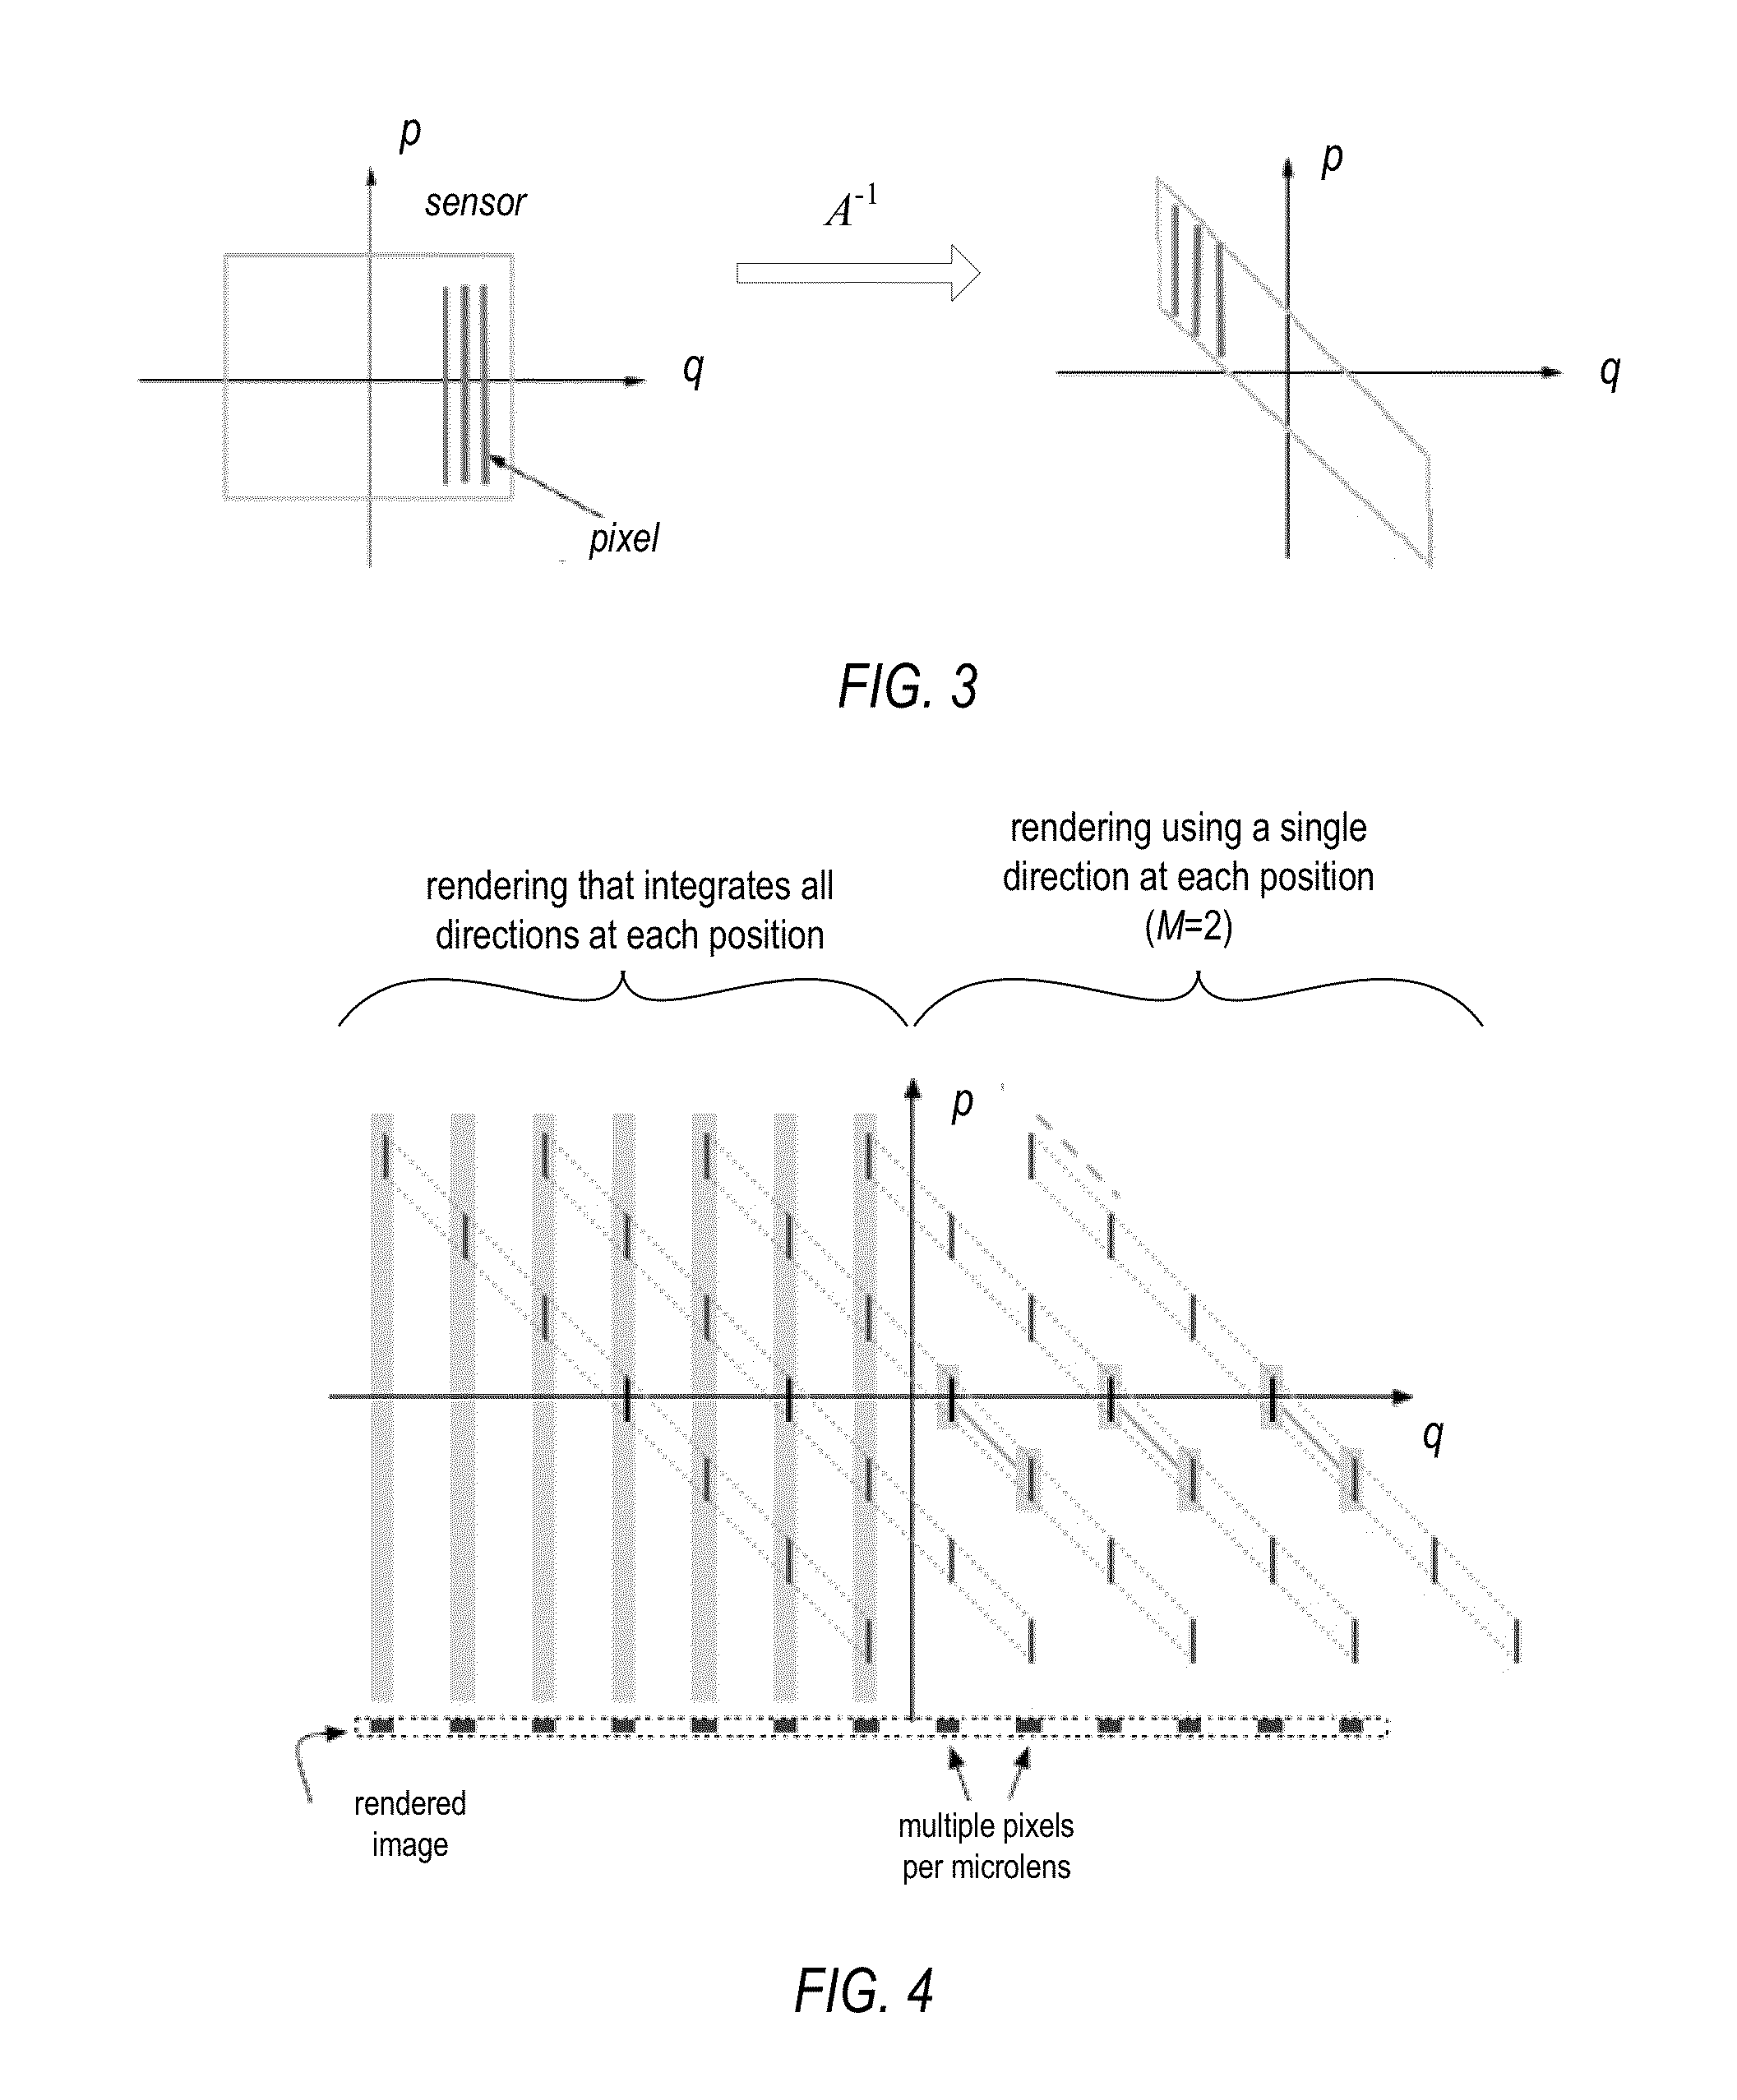 Methods, Apparatus, and Computer-Readable Storage Media for Blended Rendering of Focused Plenoptic Camera Data